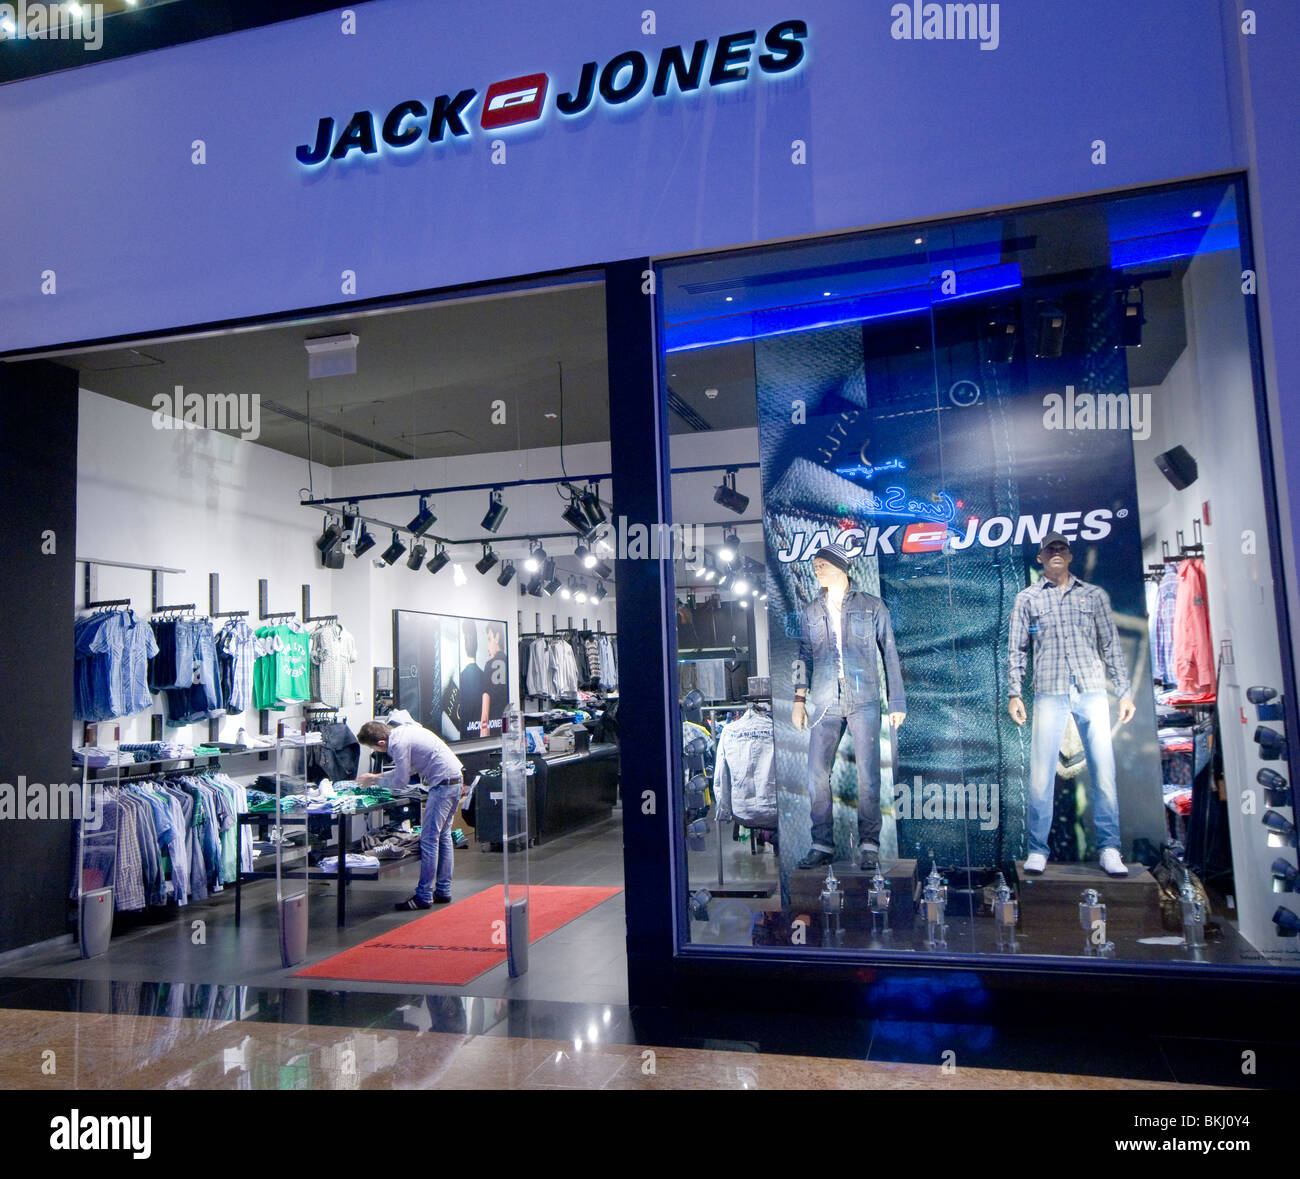 Jack Jones High Resolution Stock Photography and Images - Alamy